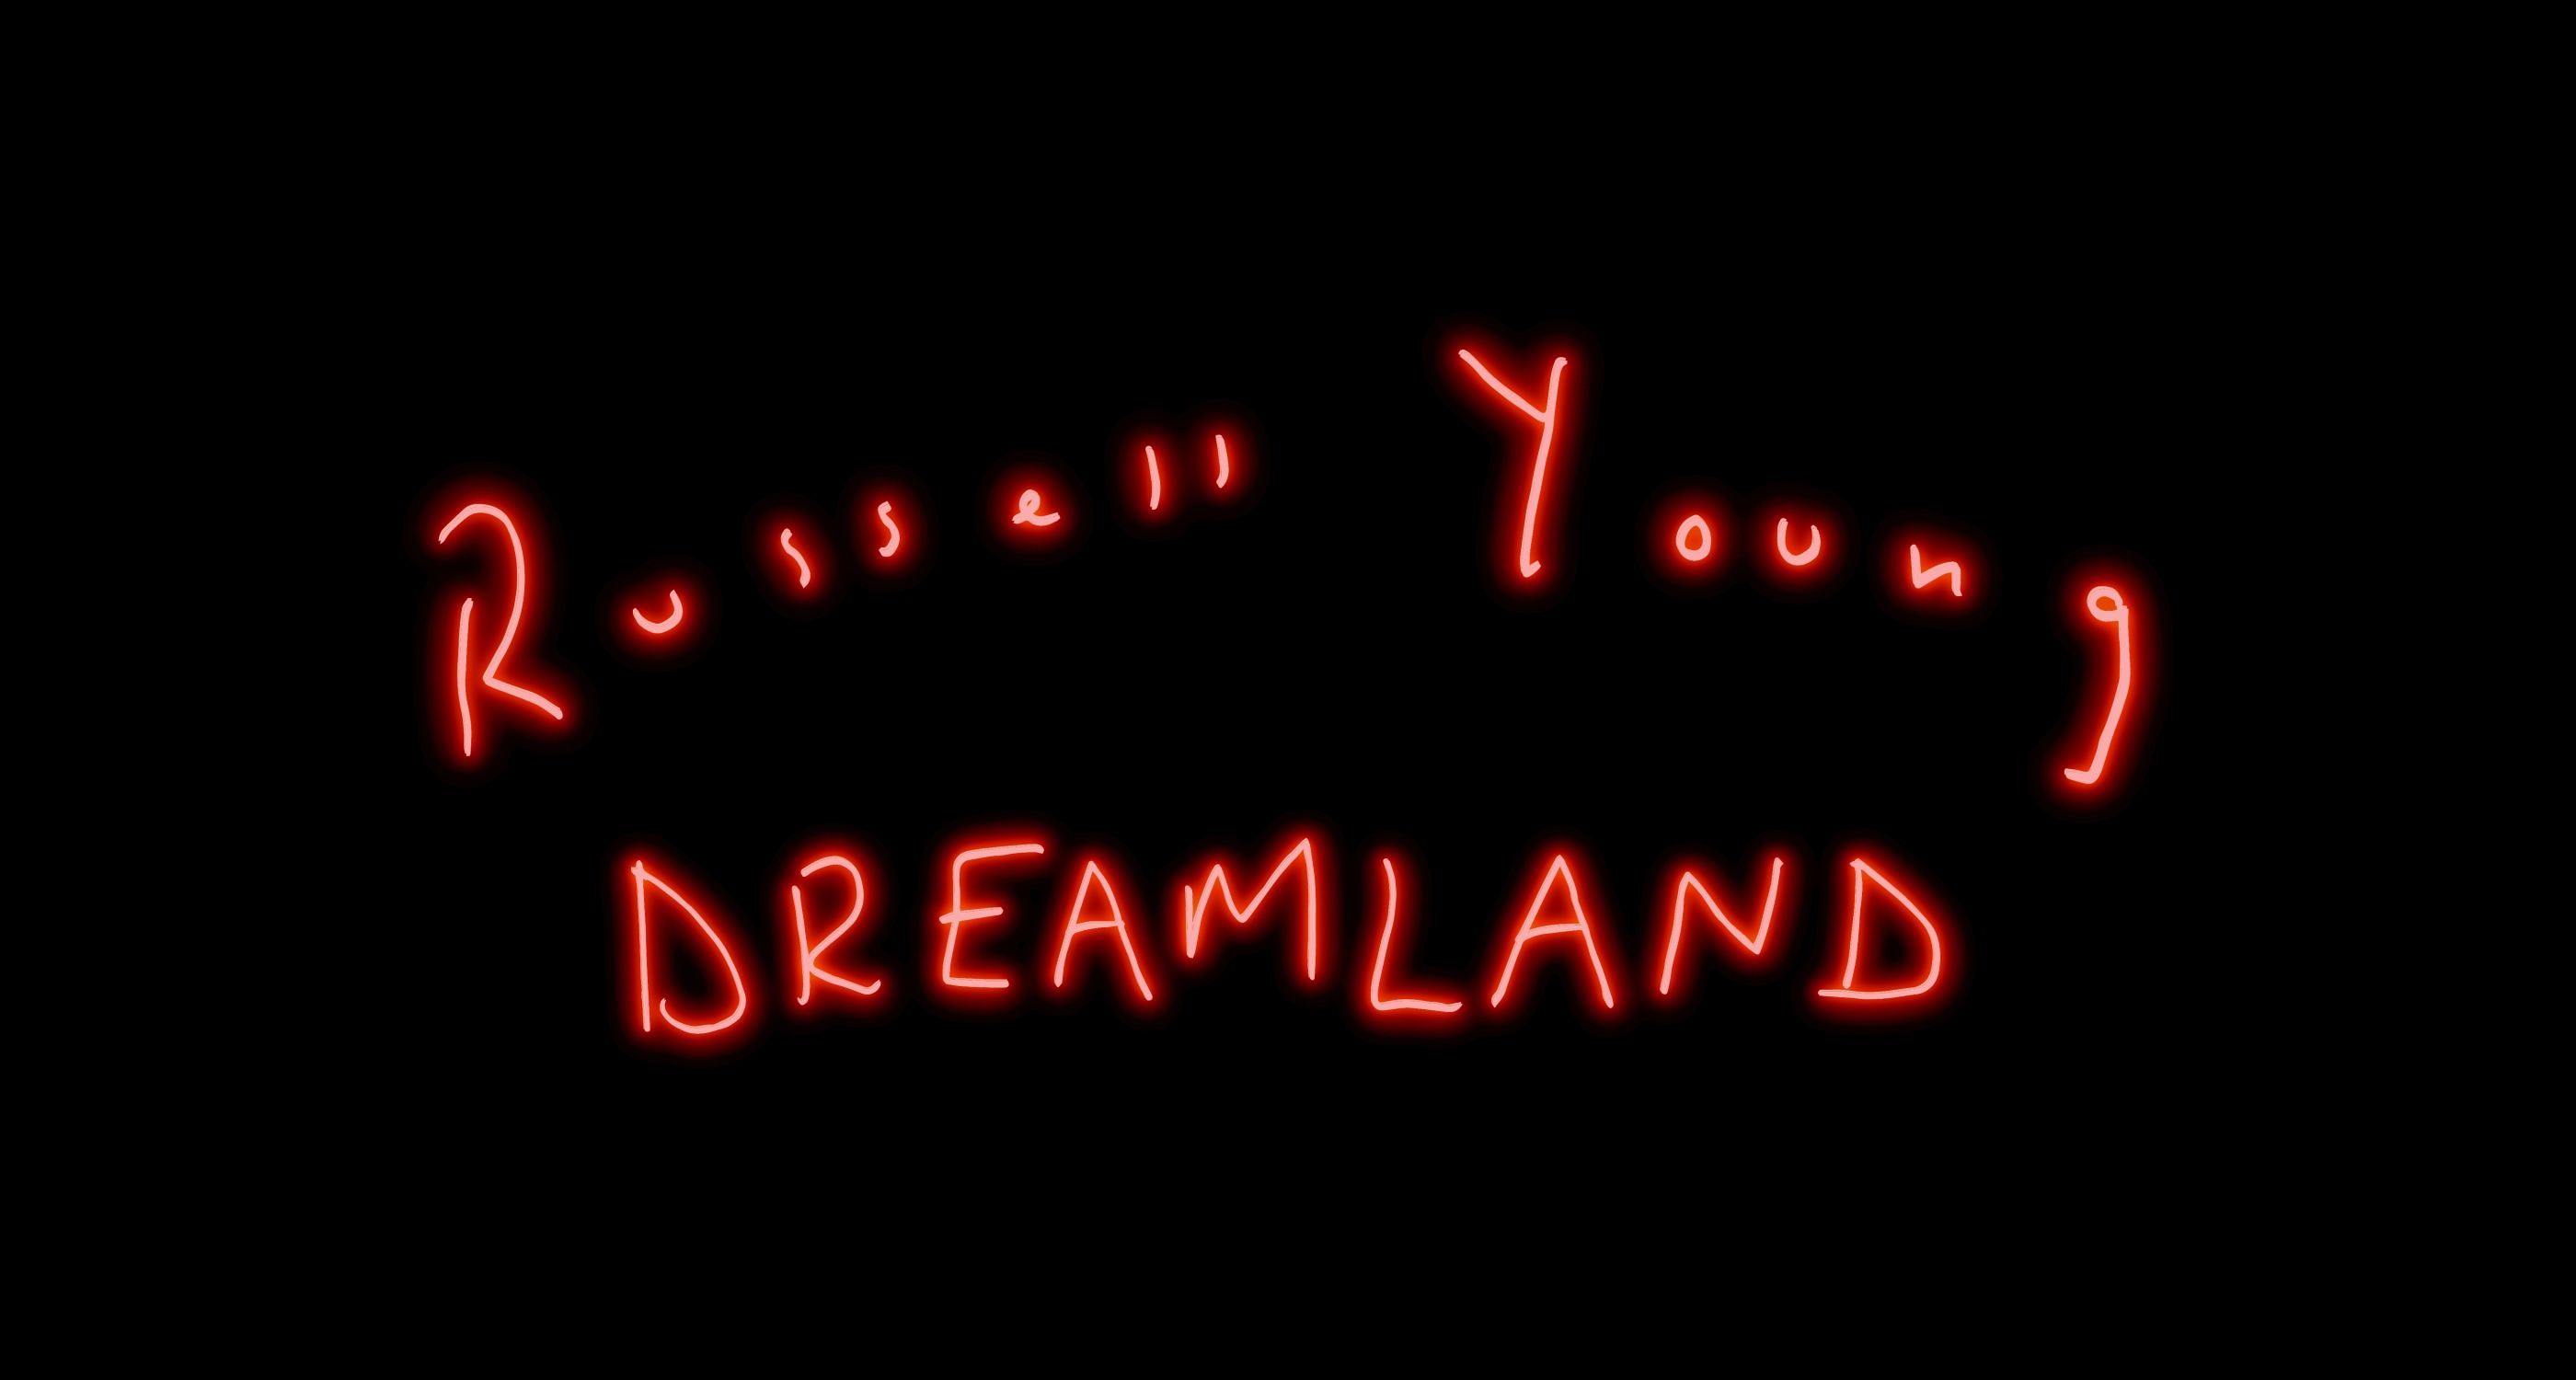 Russell Young: Dreamland